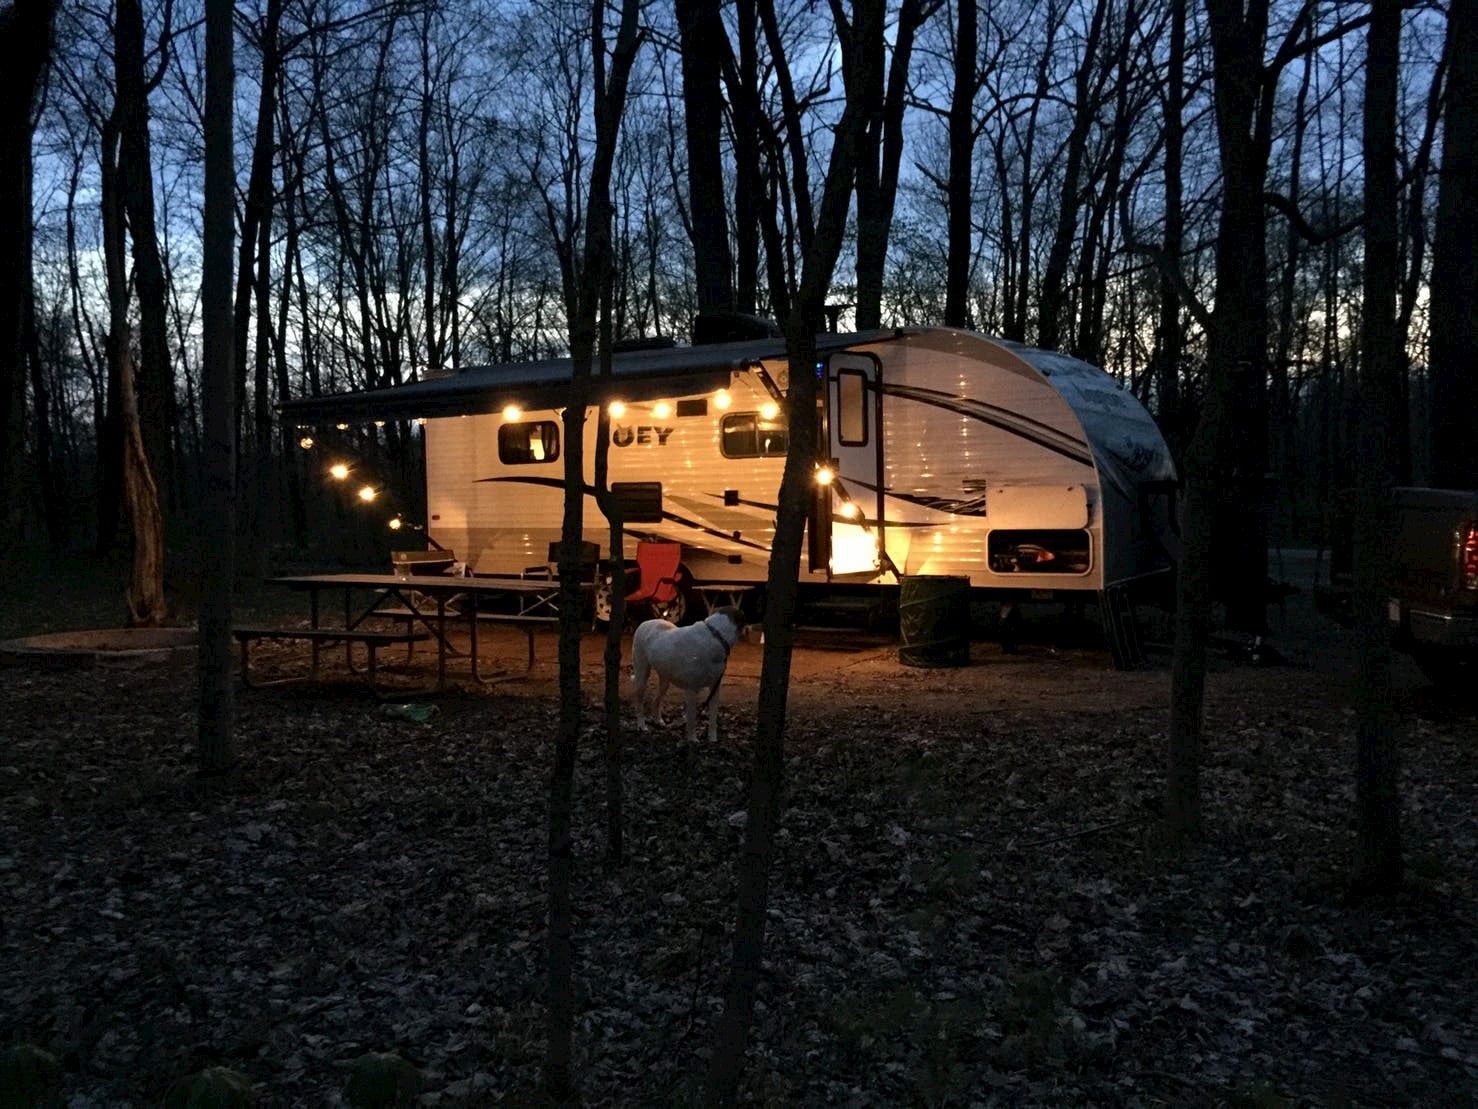 RV lit up with string lights at a campsite.